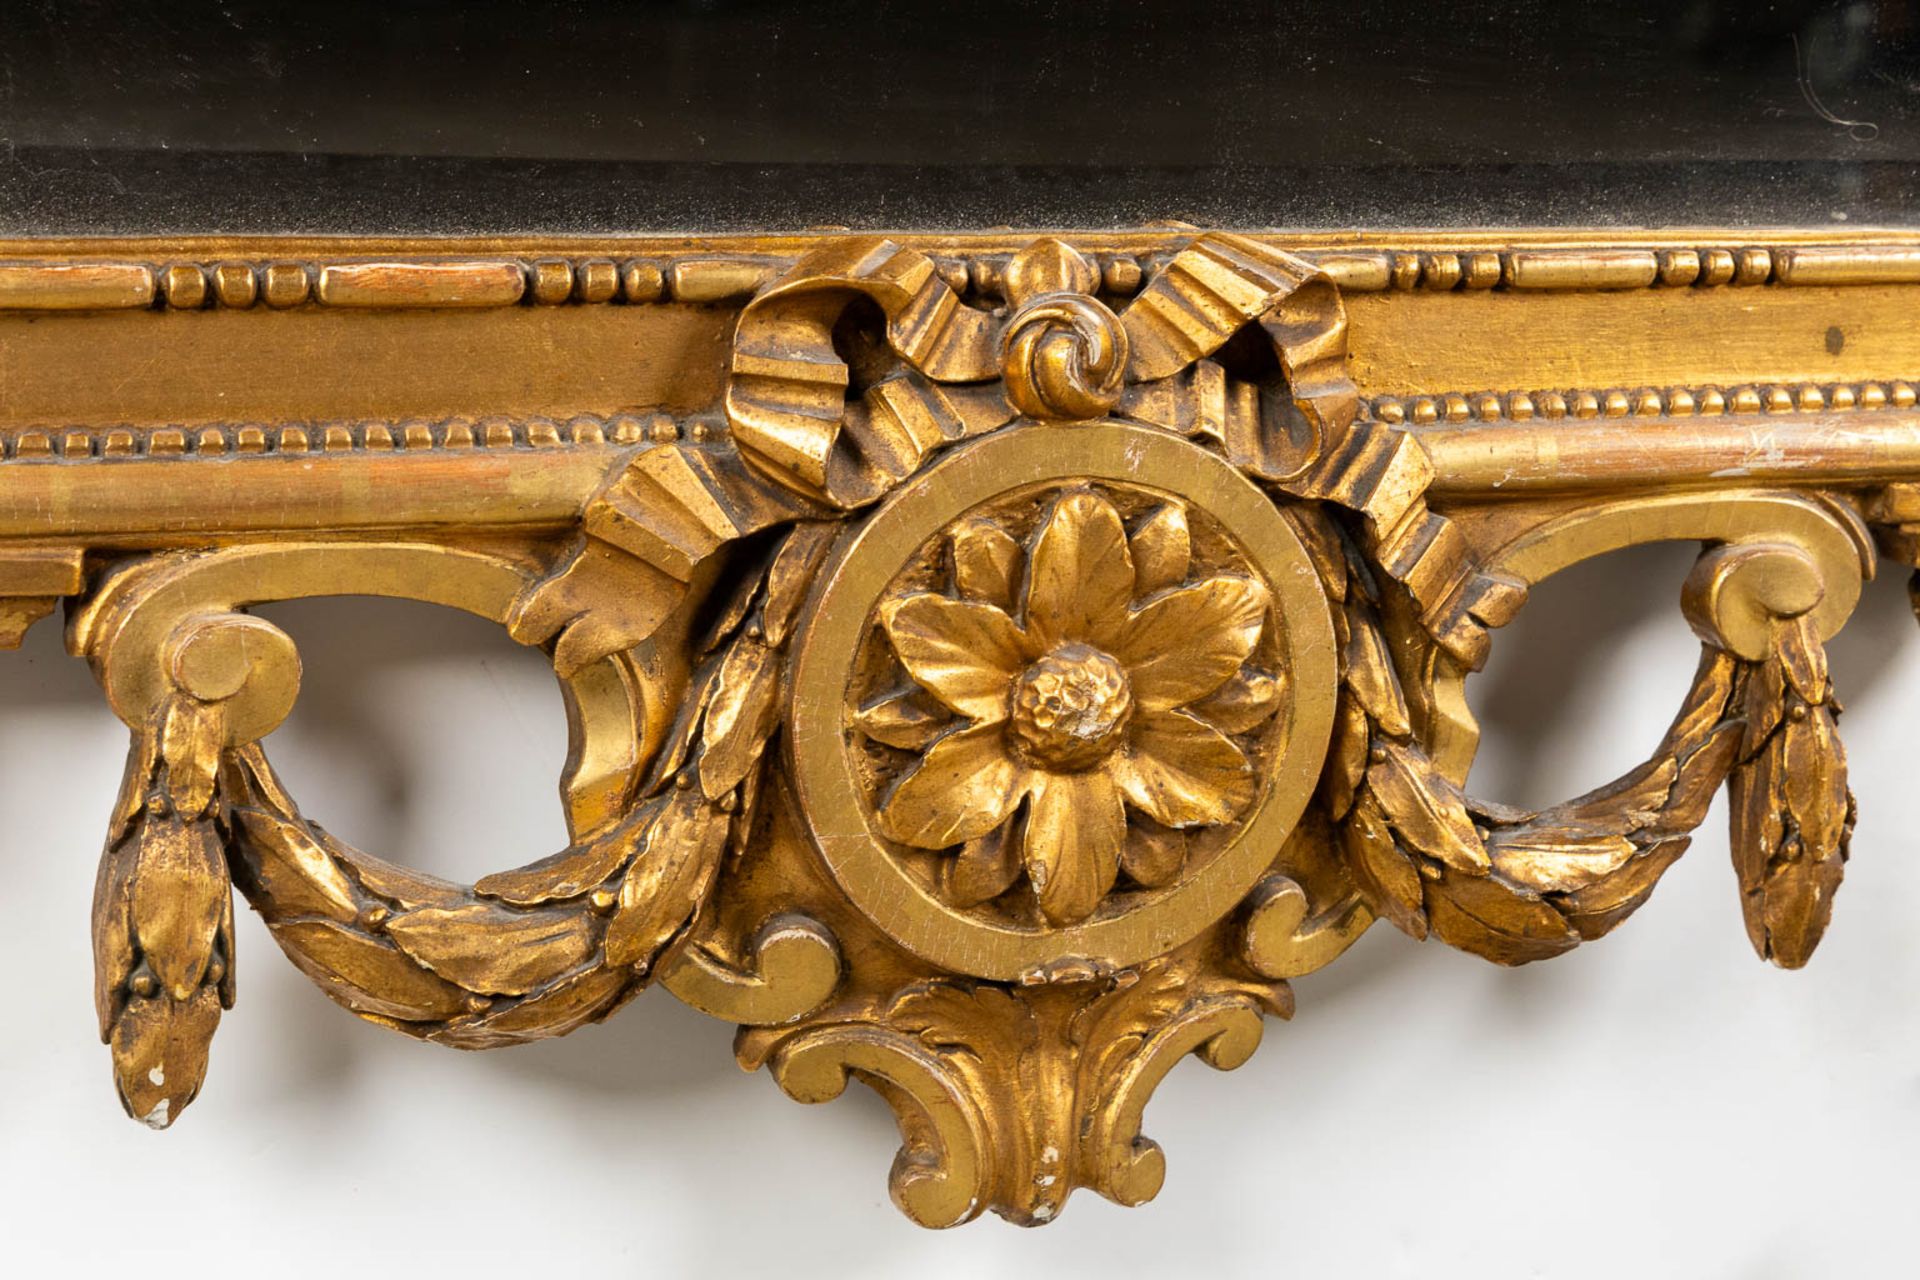 An antique mirror, gilt wood. Probably Scandinavia, Sweden. 19th C. (W:70 x H:178 cm) - Image 6 of 8